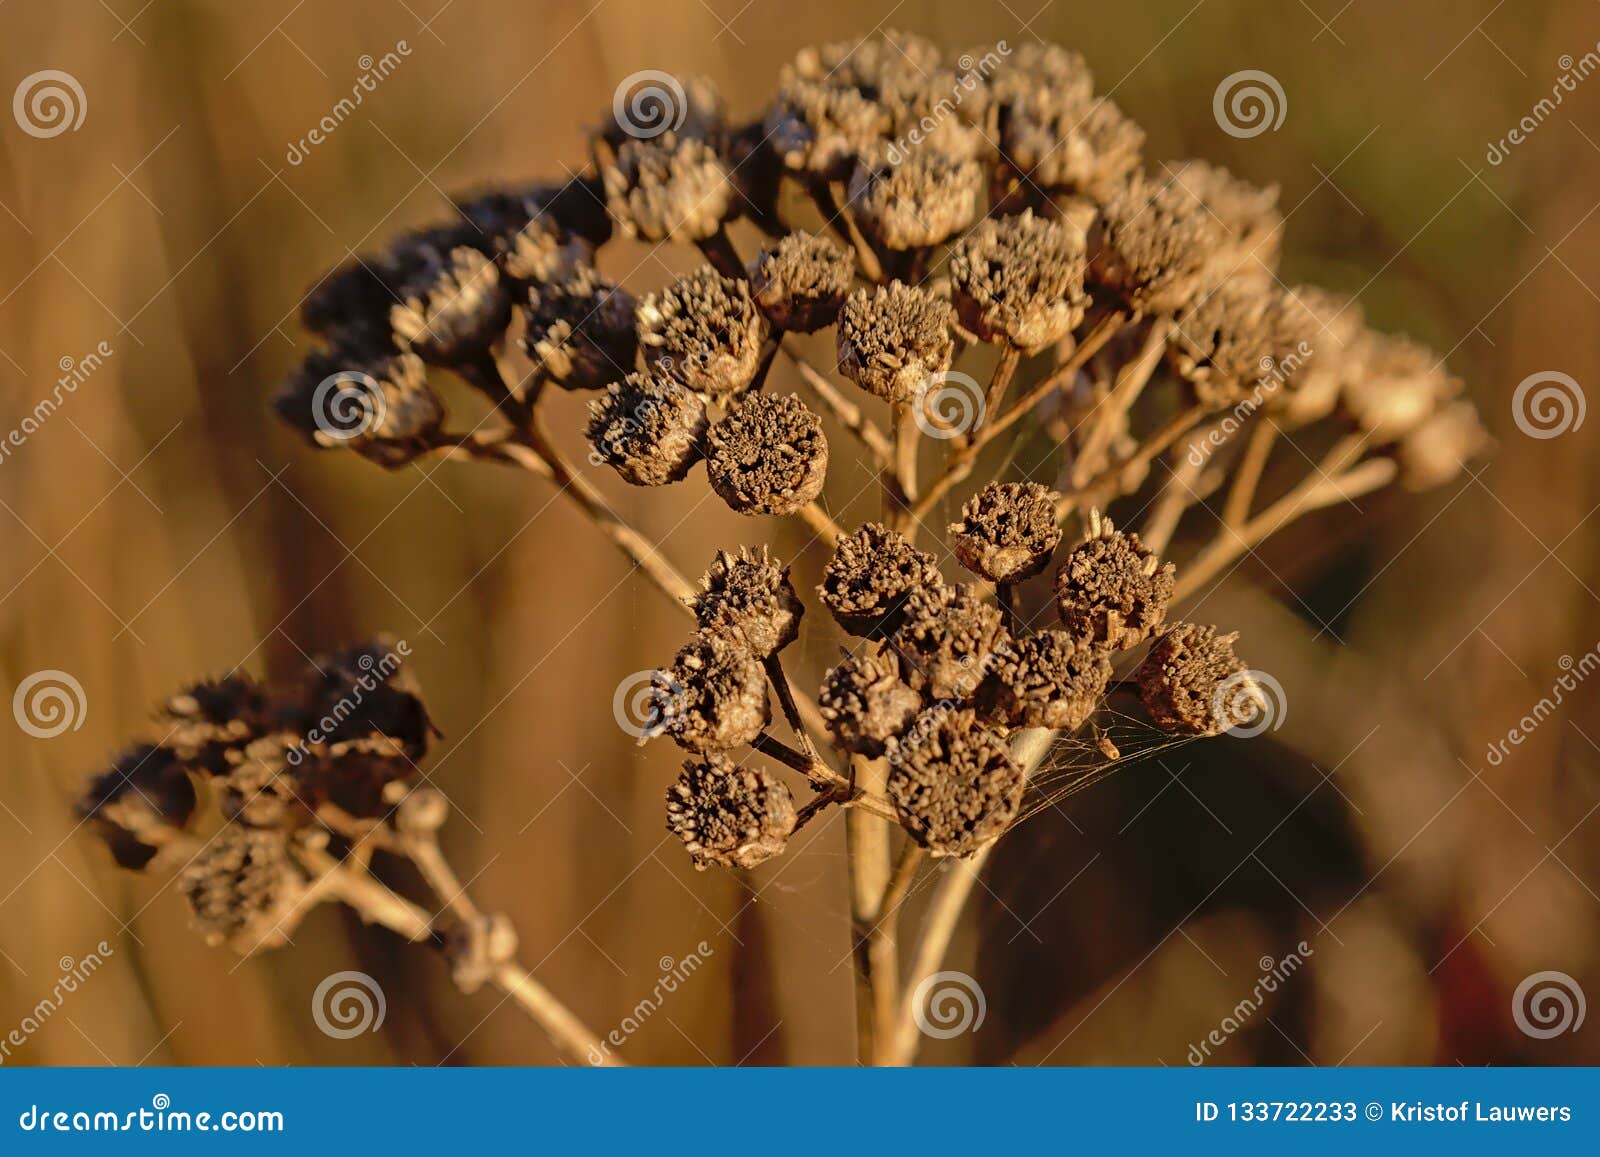 Close Up Of Dried Brown Tansy Flower Seedpods Tanacetum Vulgare Stock Image Image Of Botanical Botany 133722233